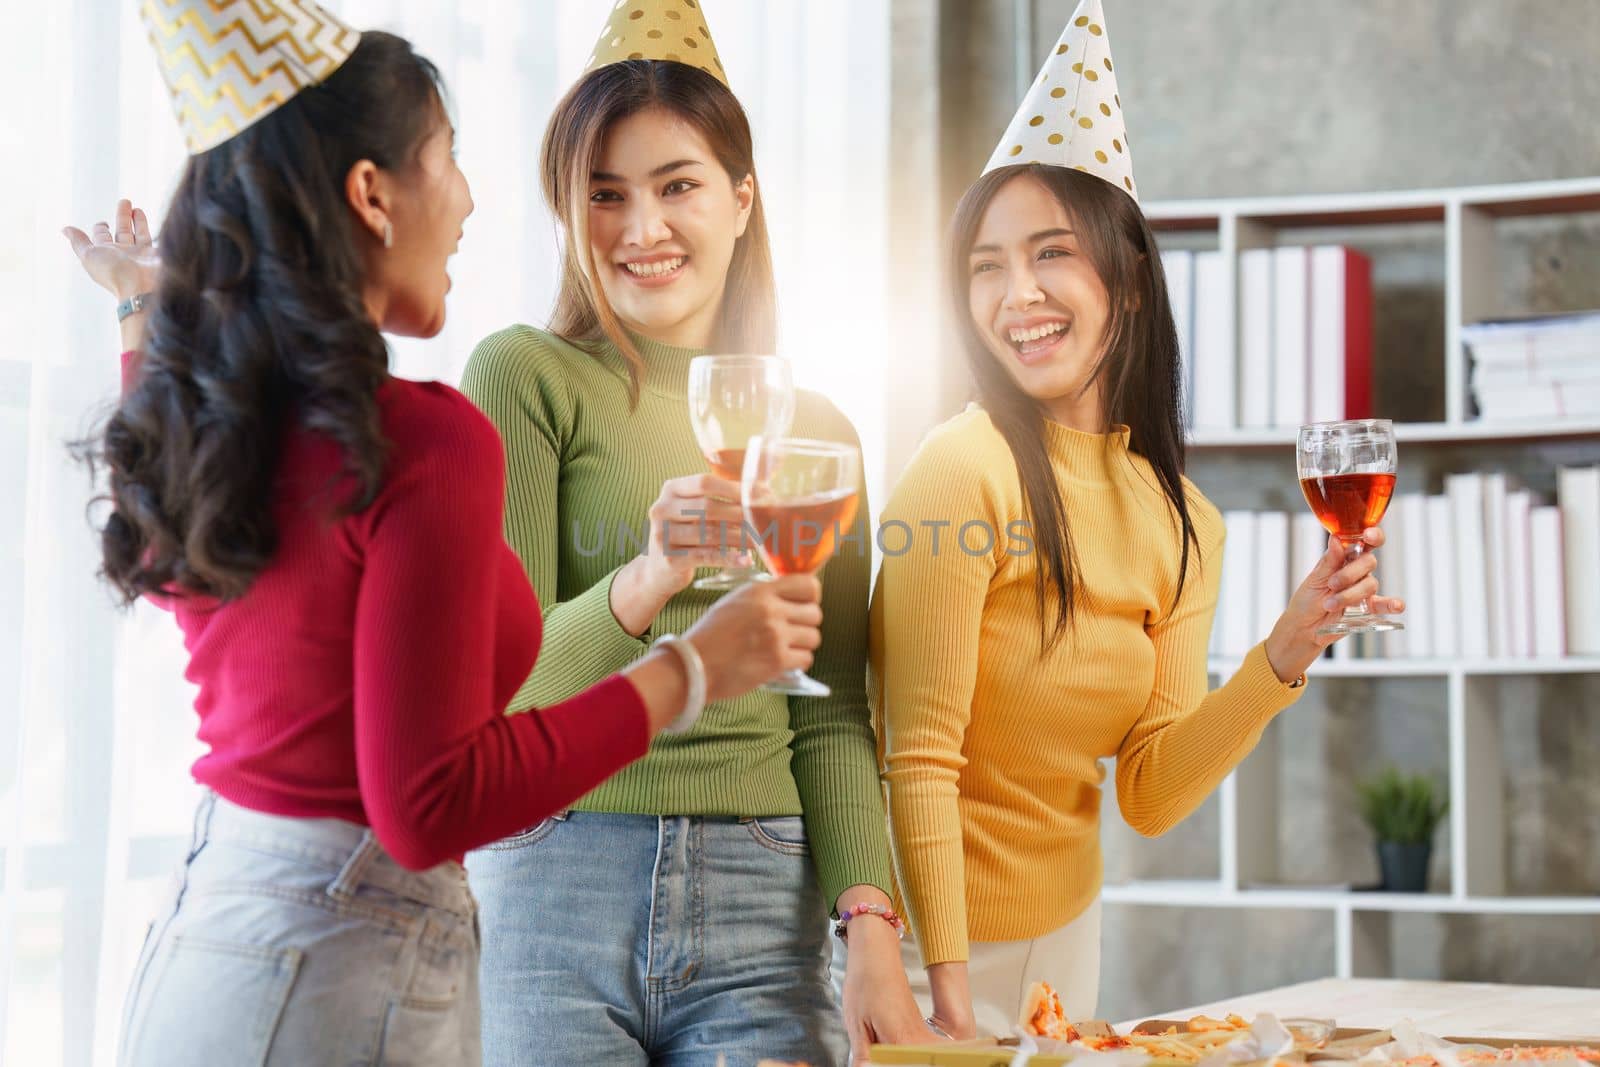 Friends at birthday party clinking glasses with champagne and pizza, enjoying christmas vacation, pizza on the table. Holiday Party event.